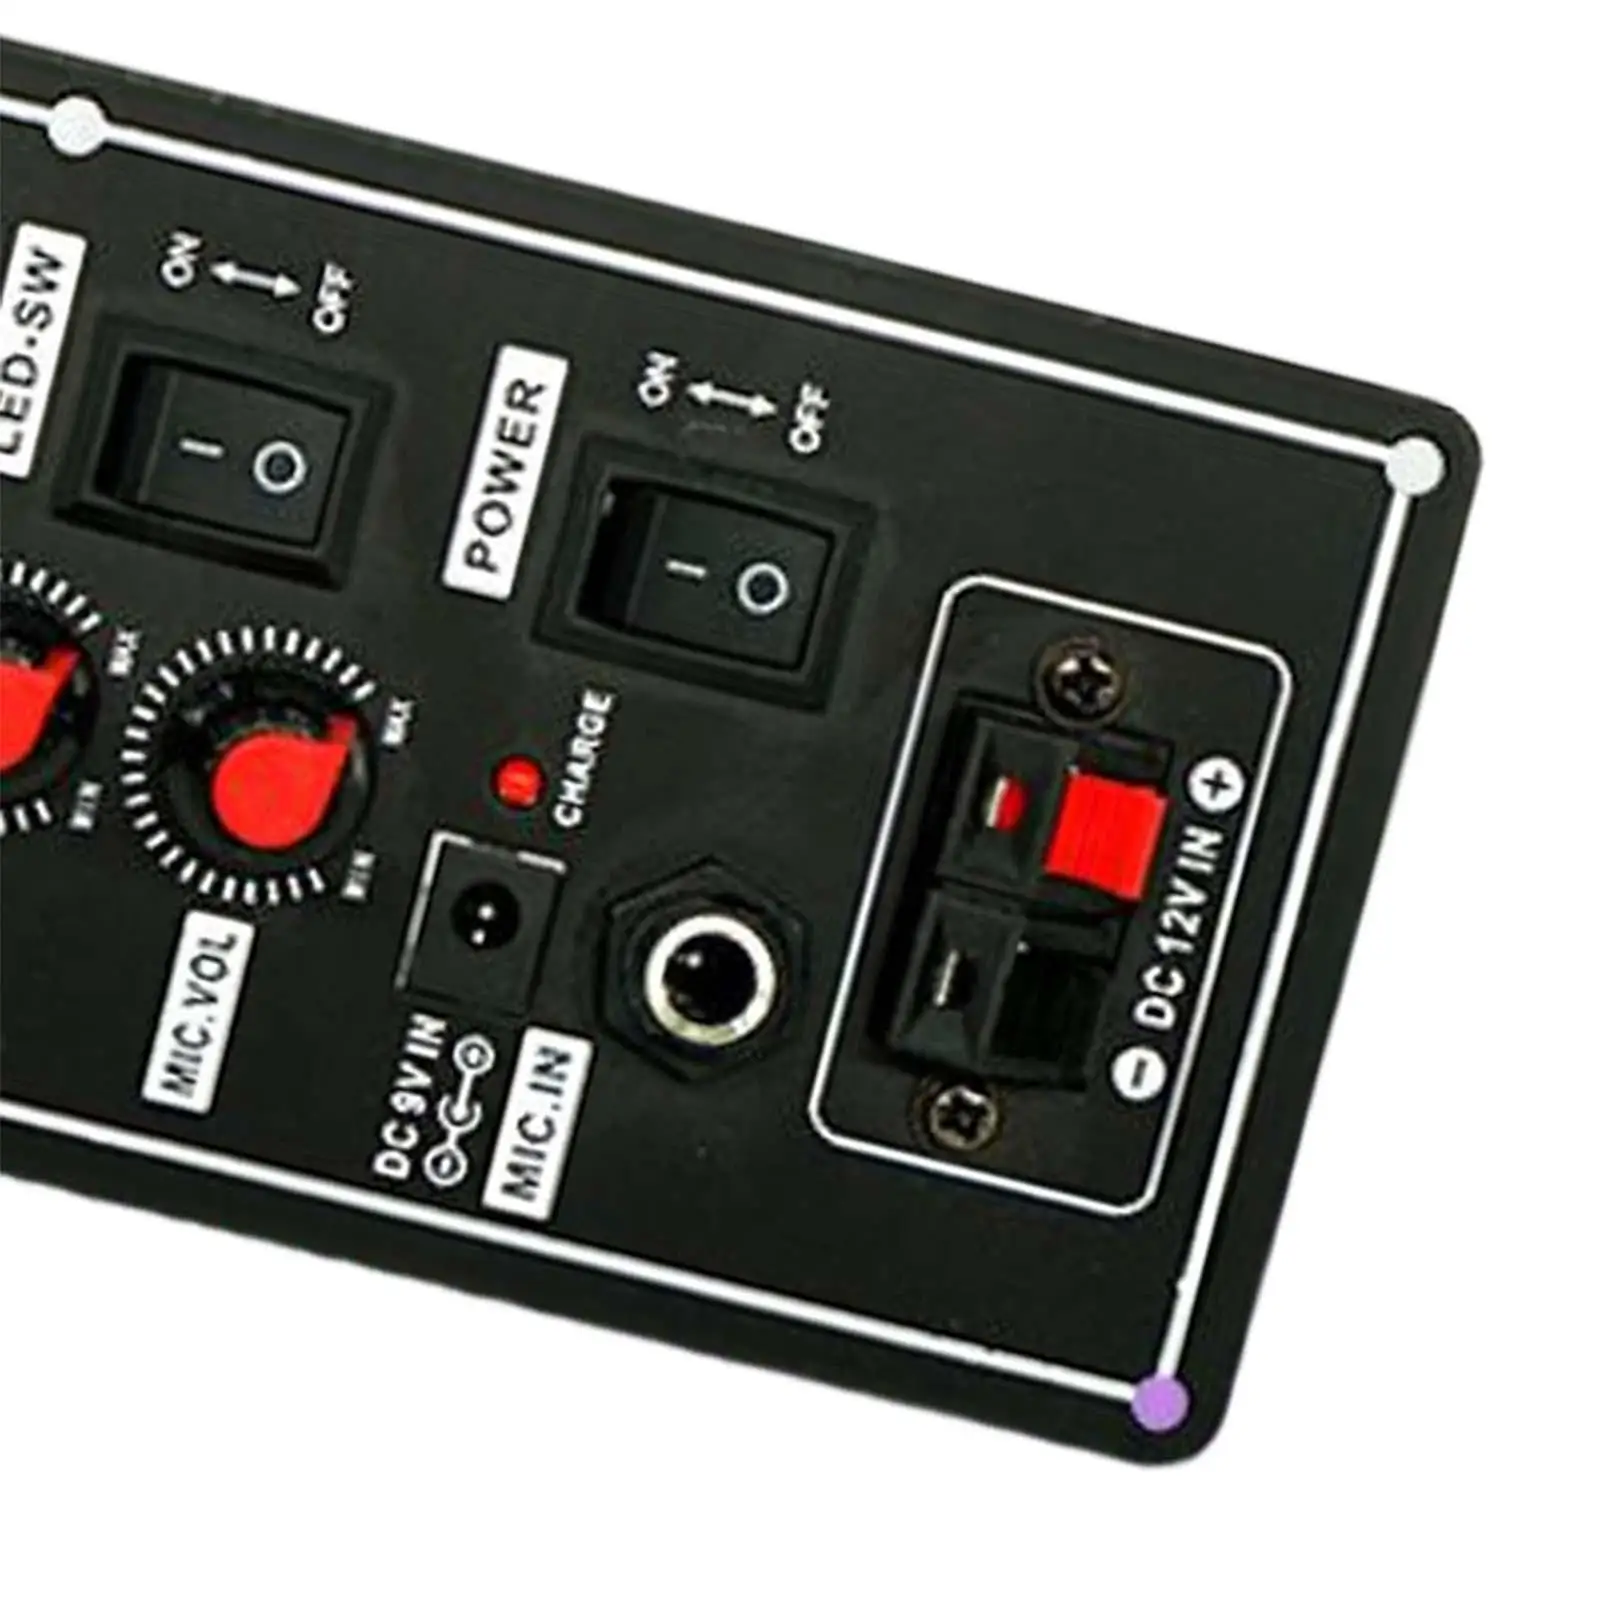 MP3 Decoding Board Power Off Memory Function Support MP3/WMA/WAV/flac/ape Audio Receiver Amplifier with Recording Function